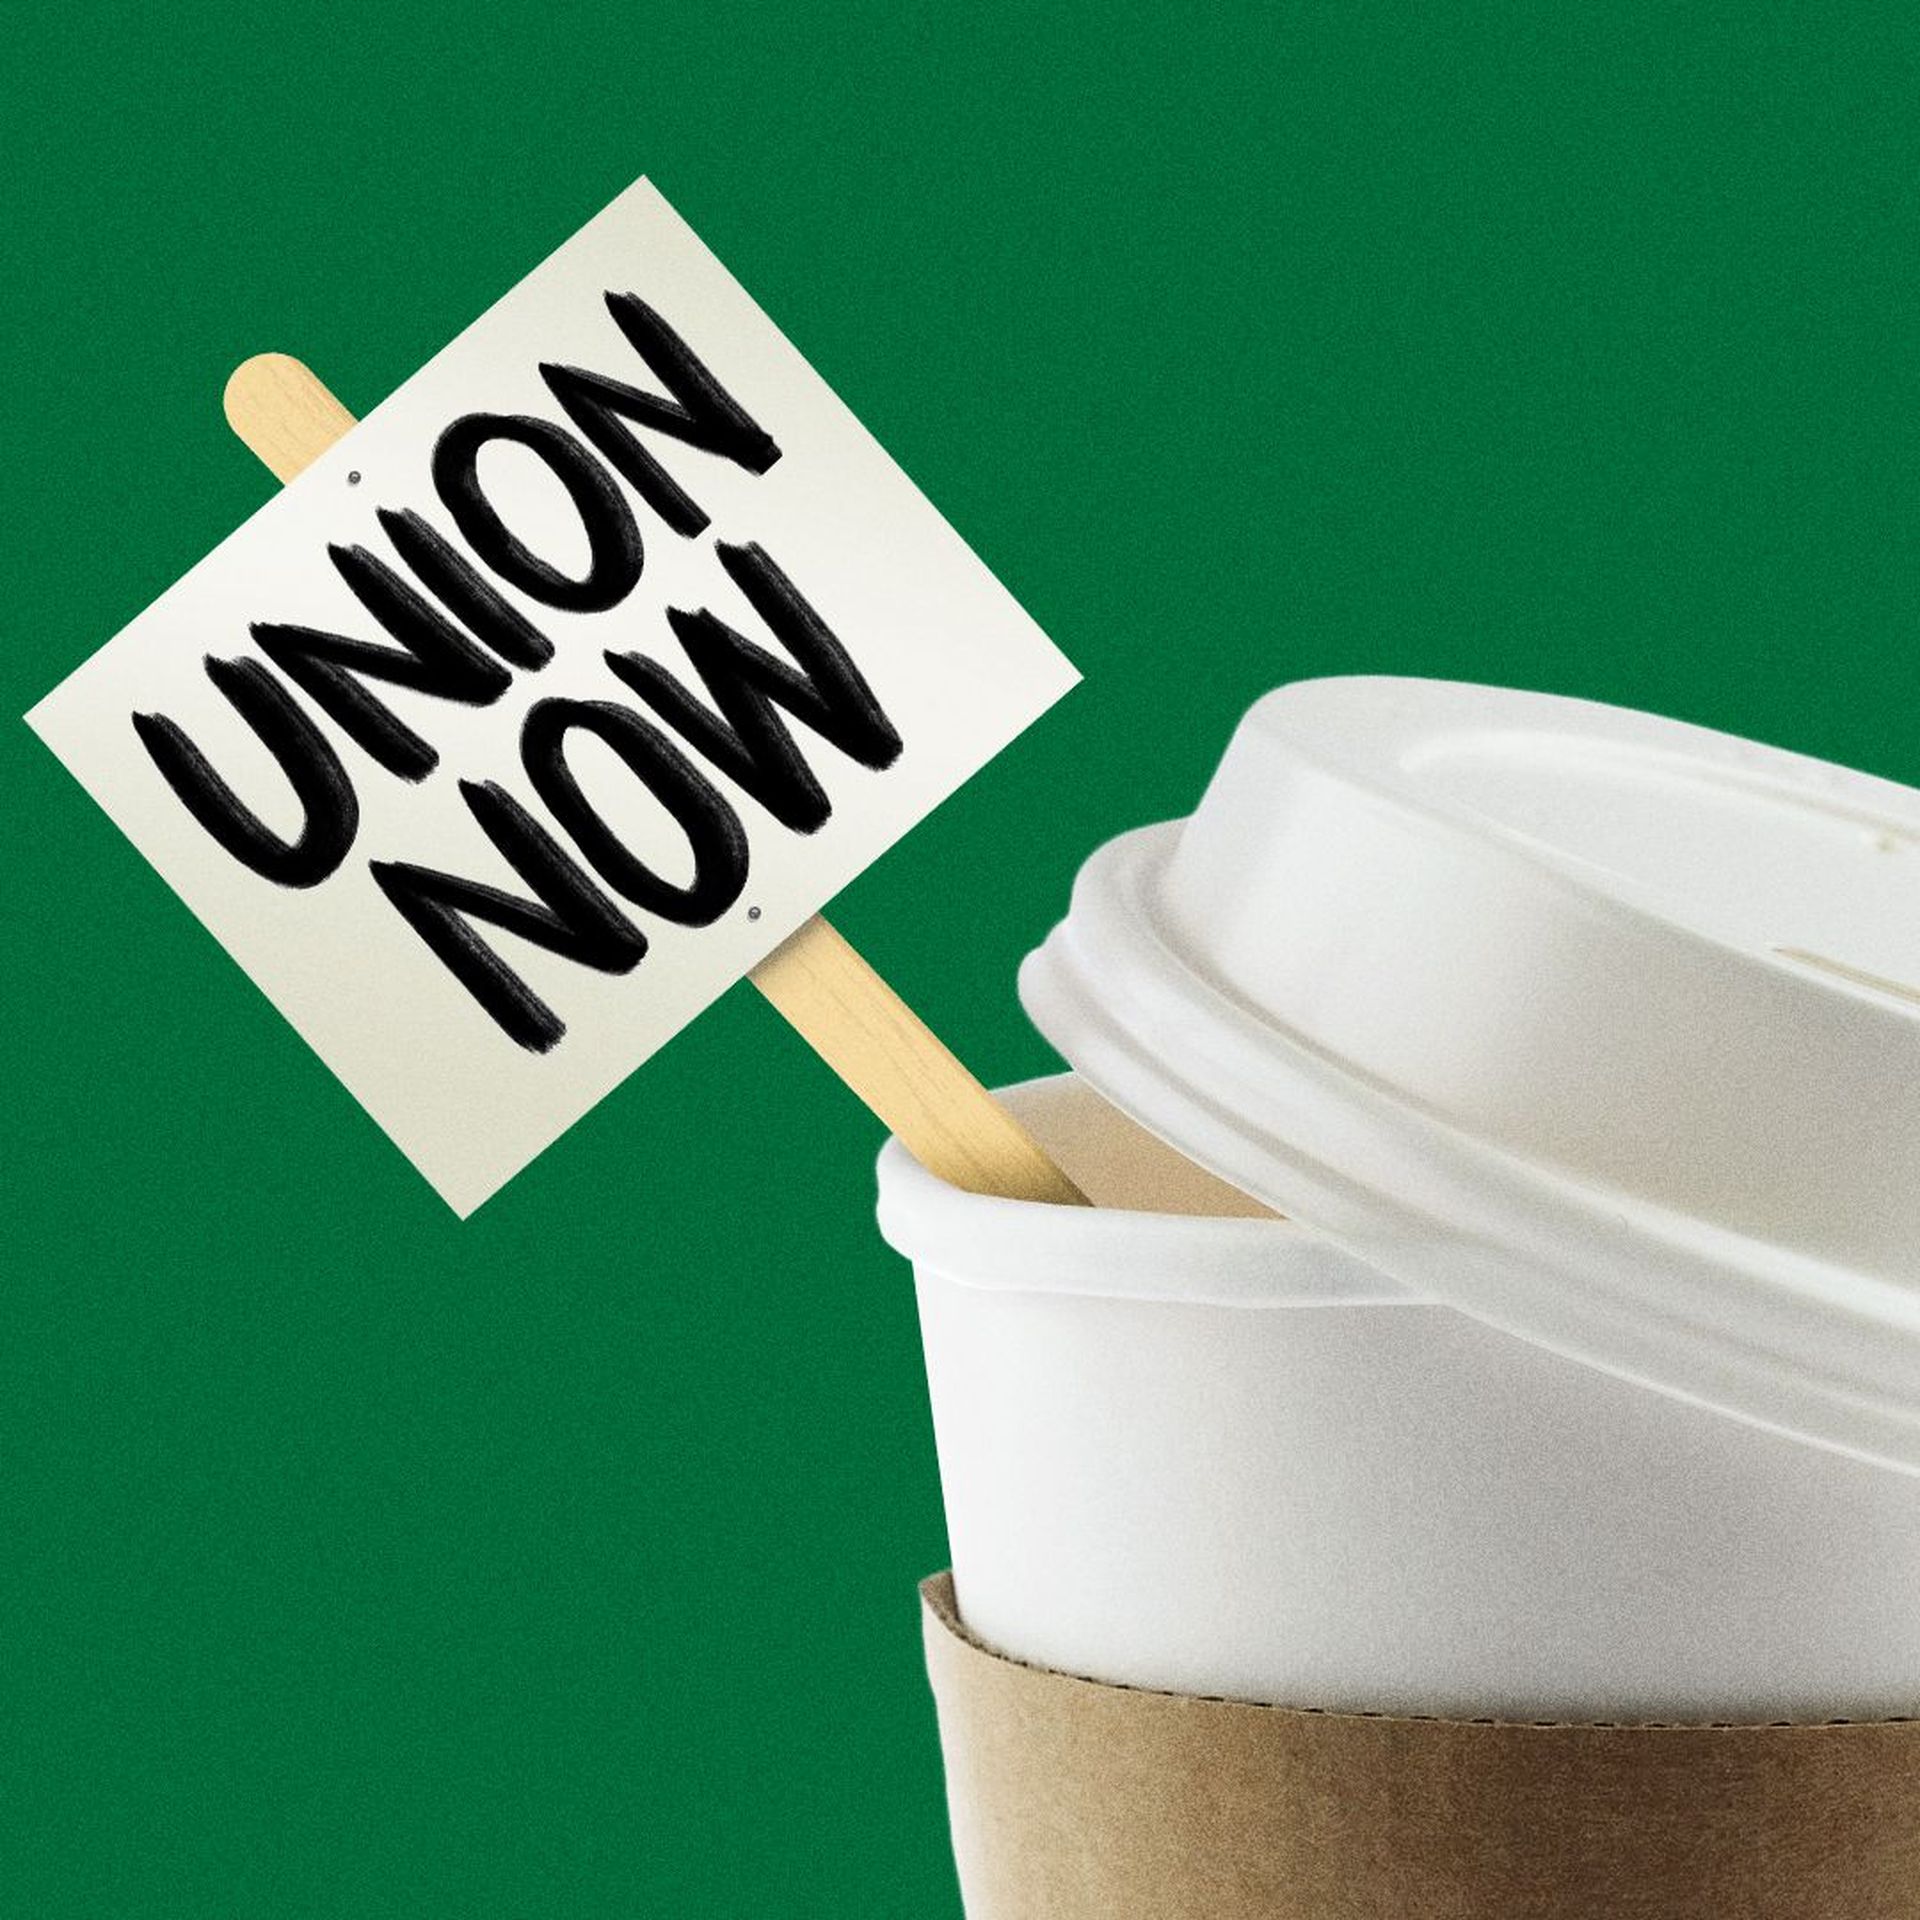 Illustration of a union protest sign attached to a coffee stirrer in a to-go cup.